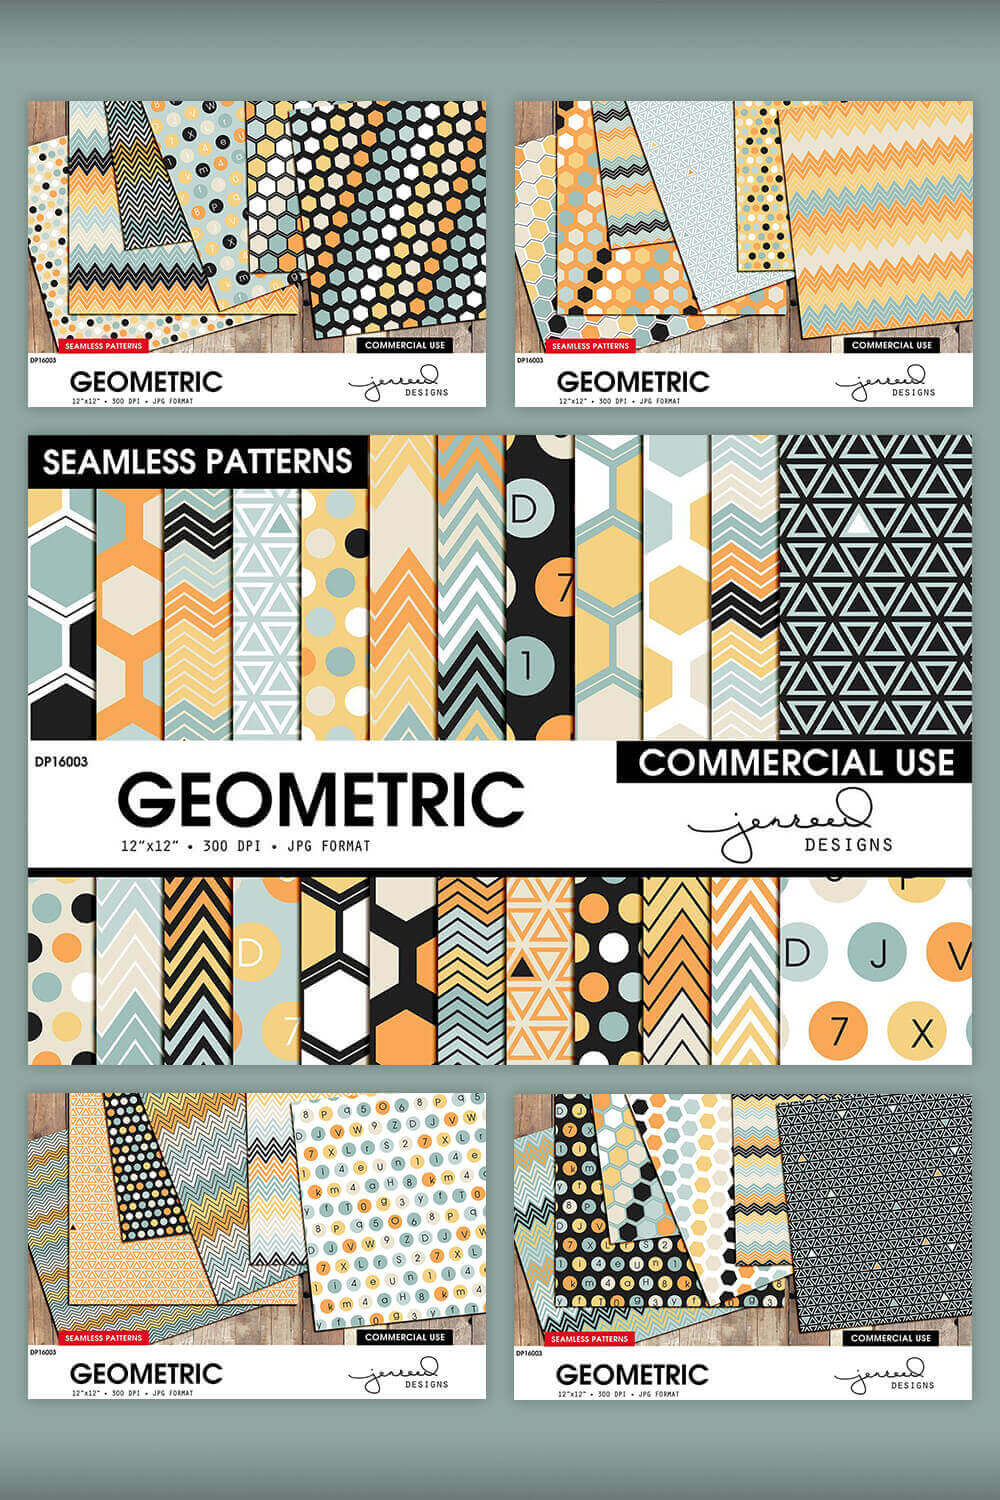 Many Examples of Geometric Seamless Patterns.